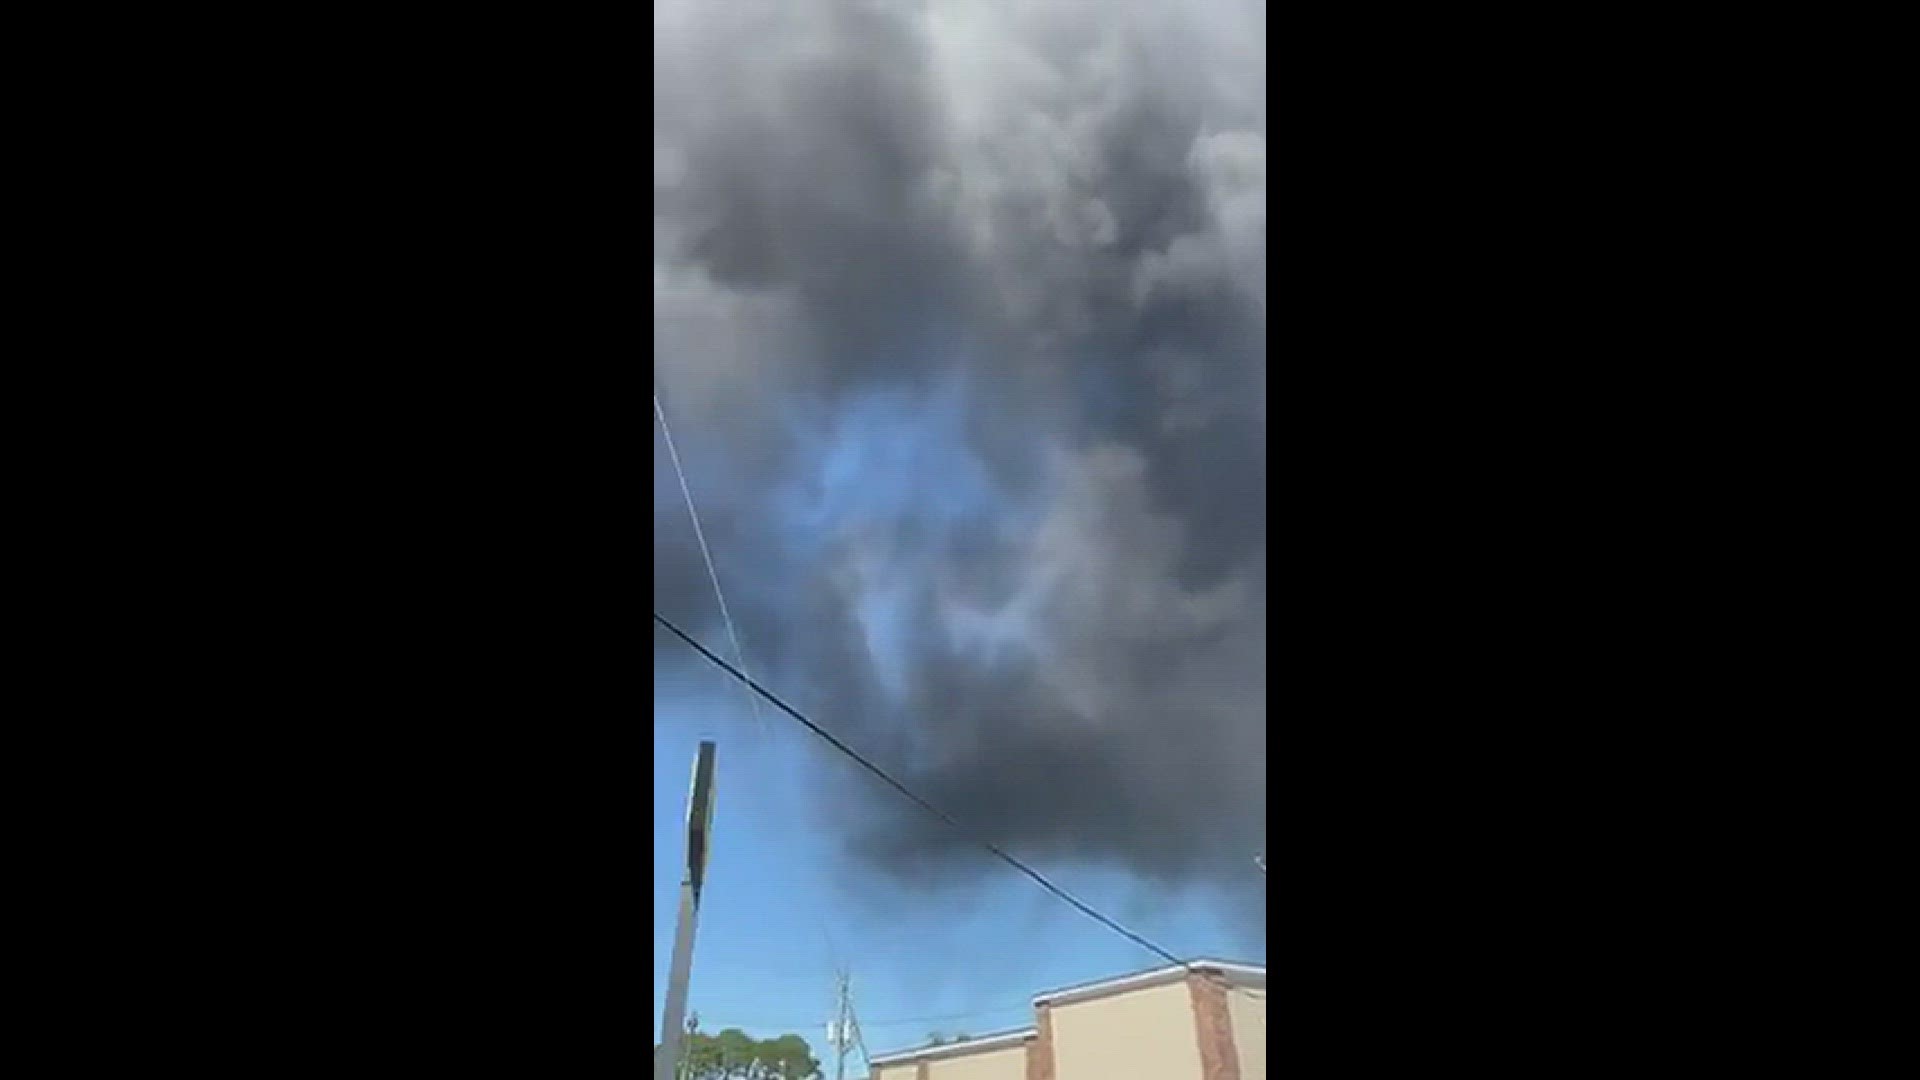 Video of the fire at Pinova manufacturing plant
Credit: Freddy P